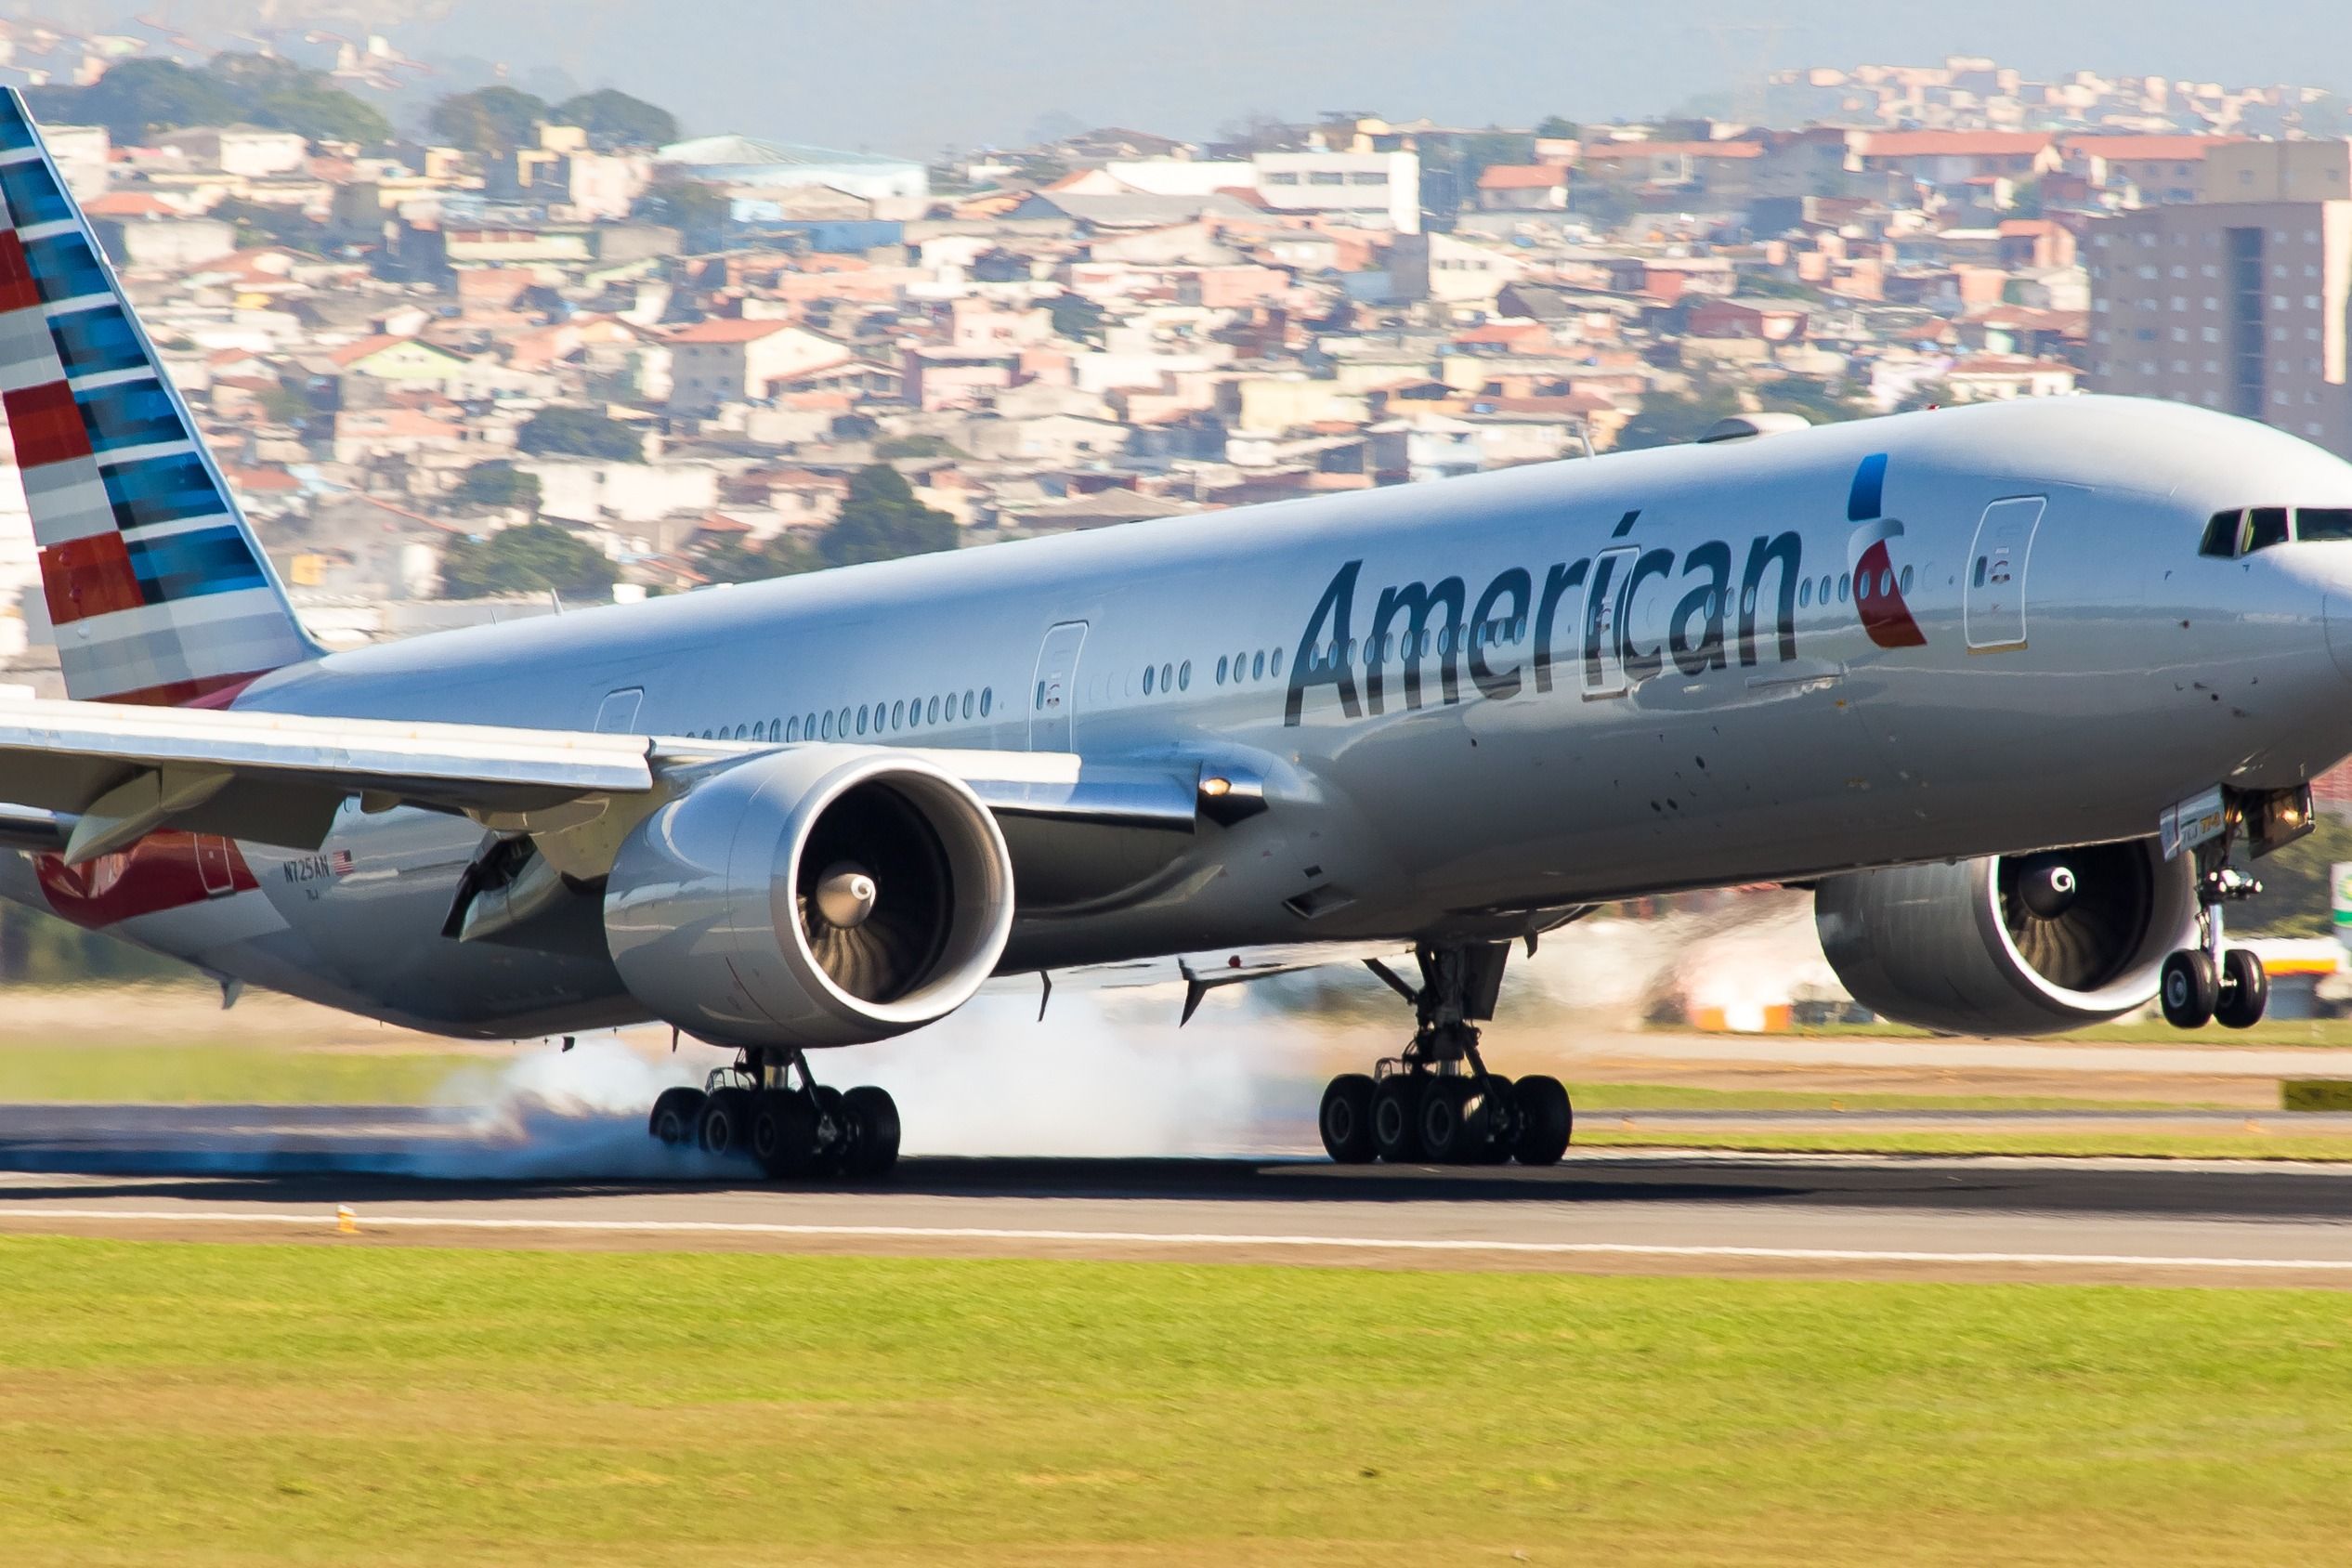 An American Airlines Boeing 777-300ER landing on a runway.